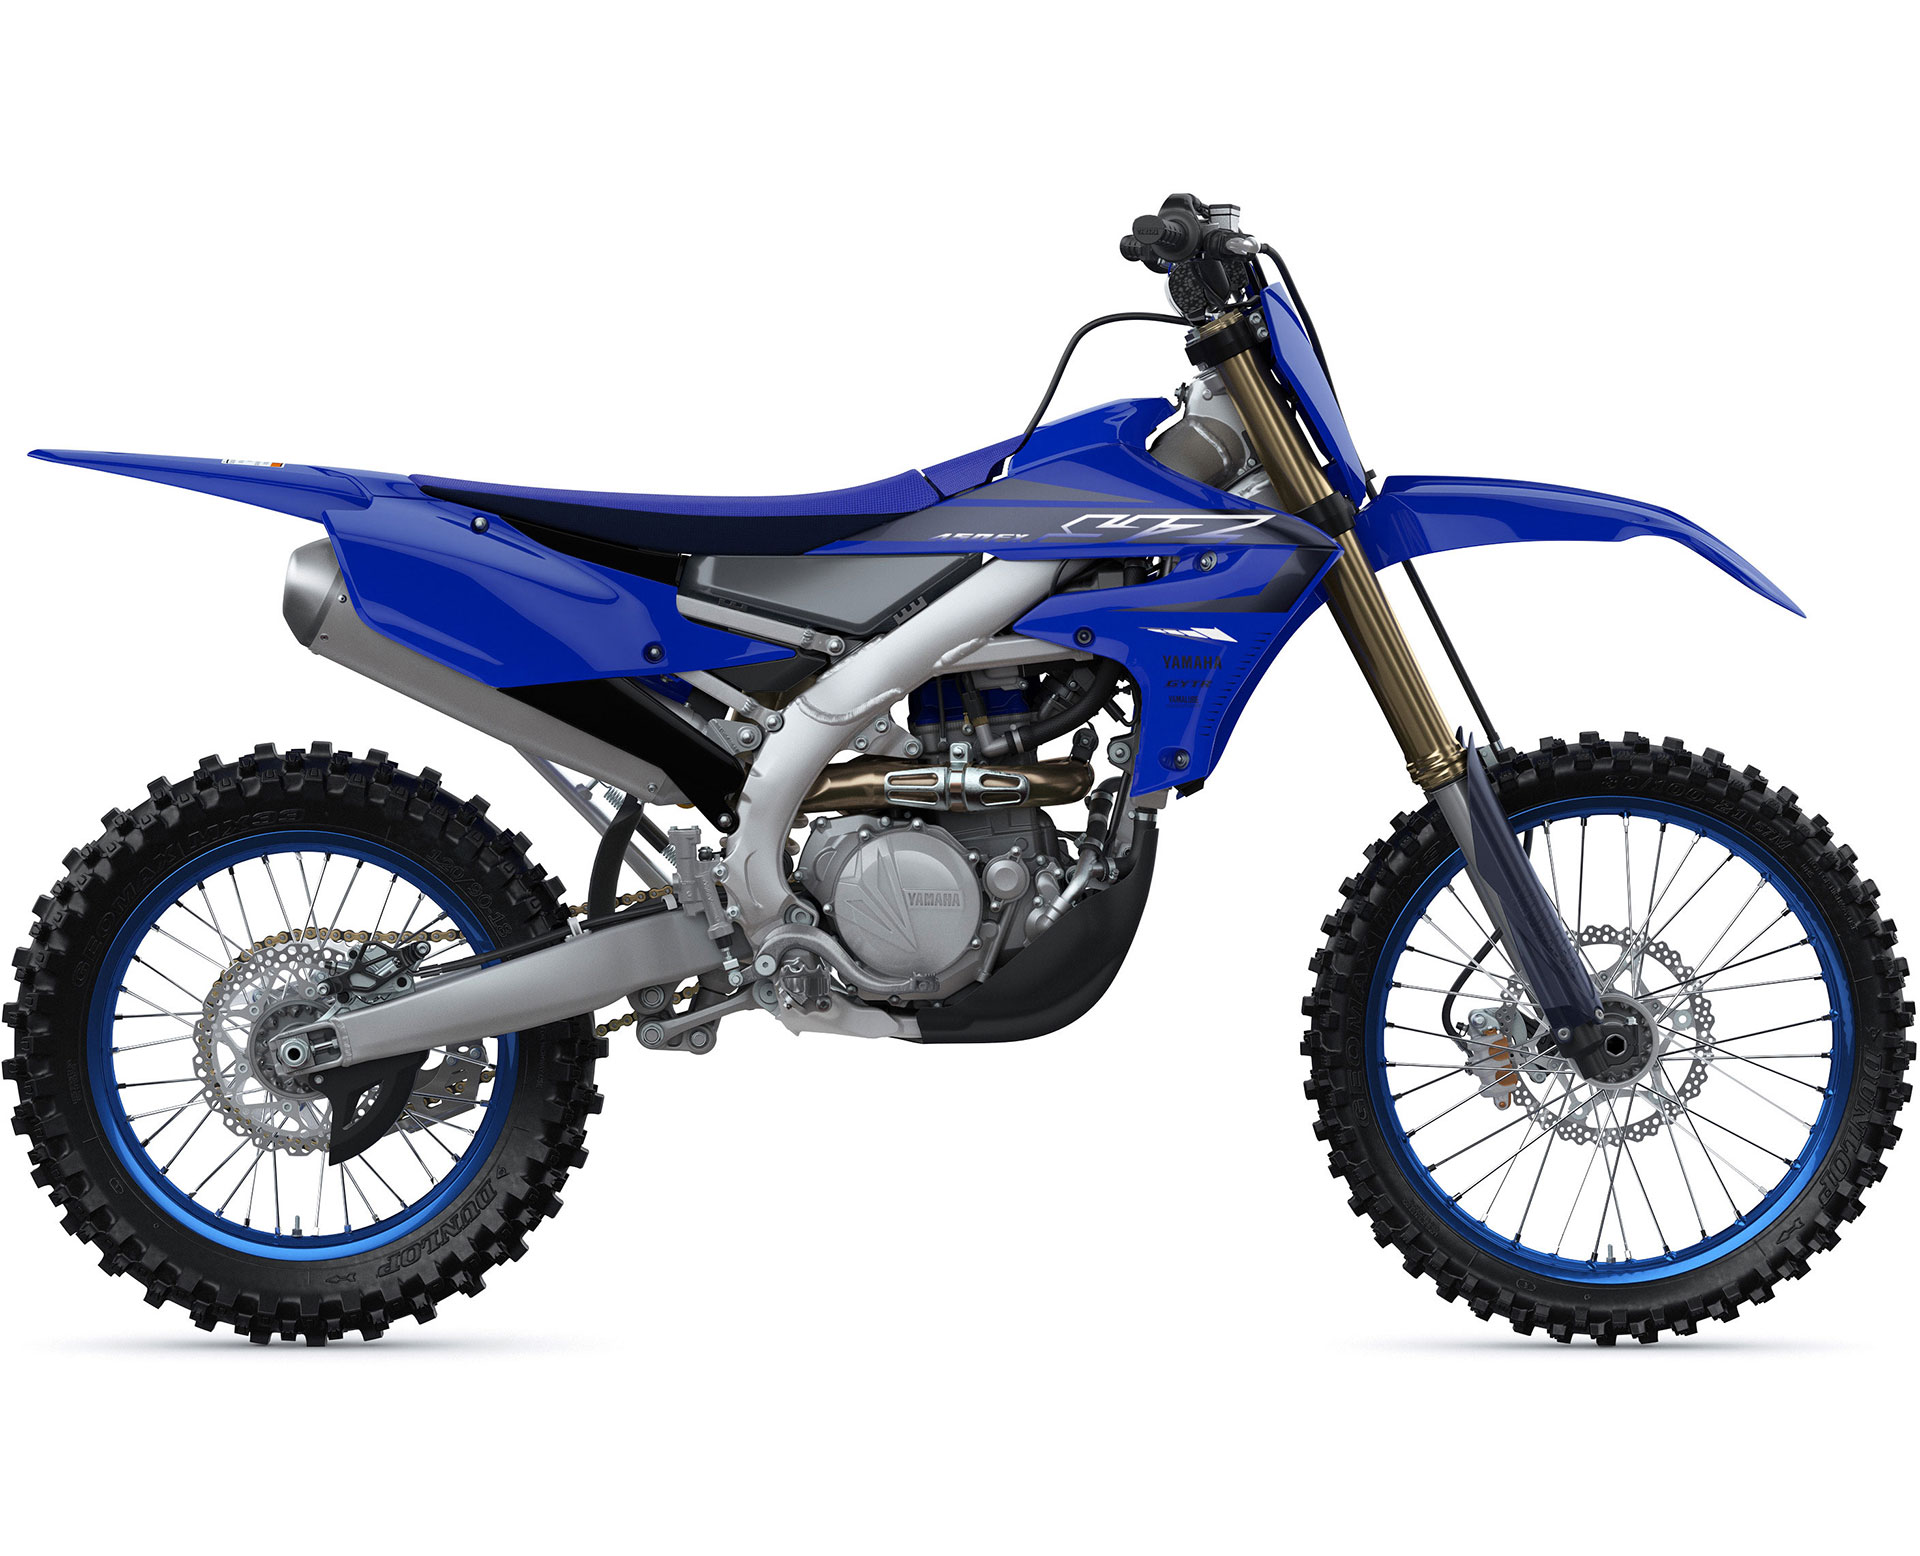 Thumbnail of your customized 2023 YZ450FX